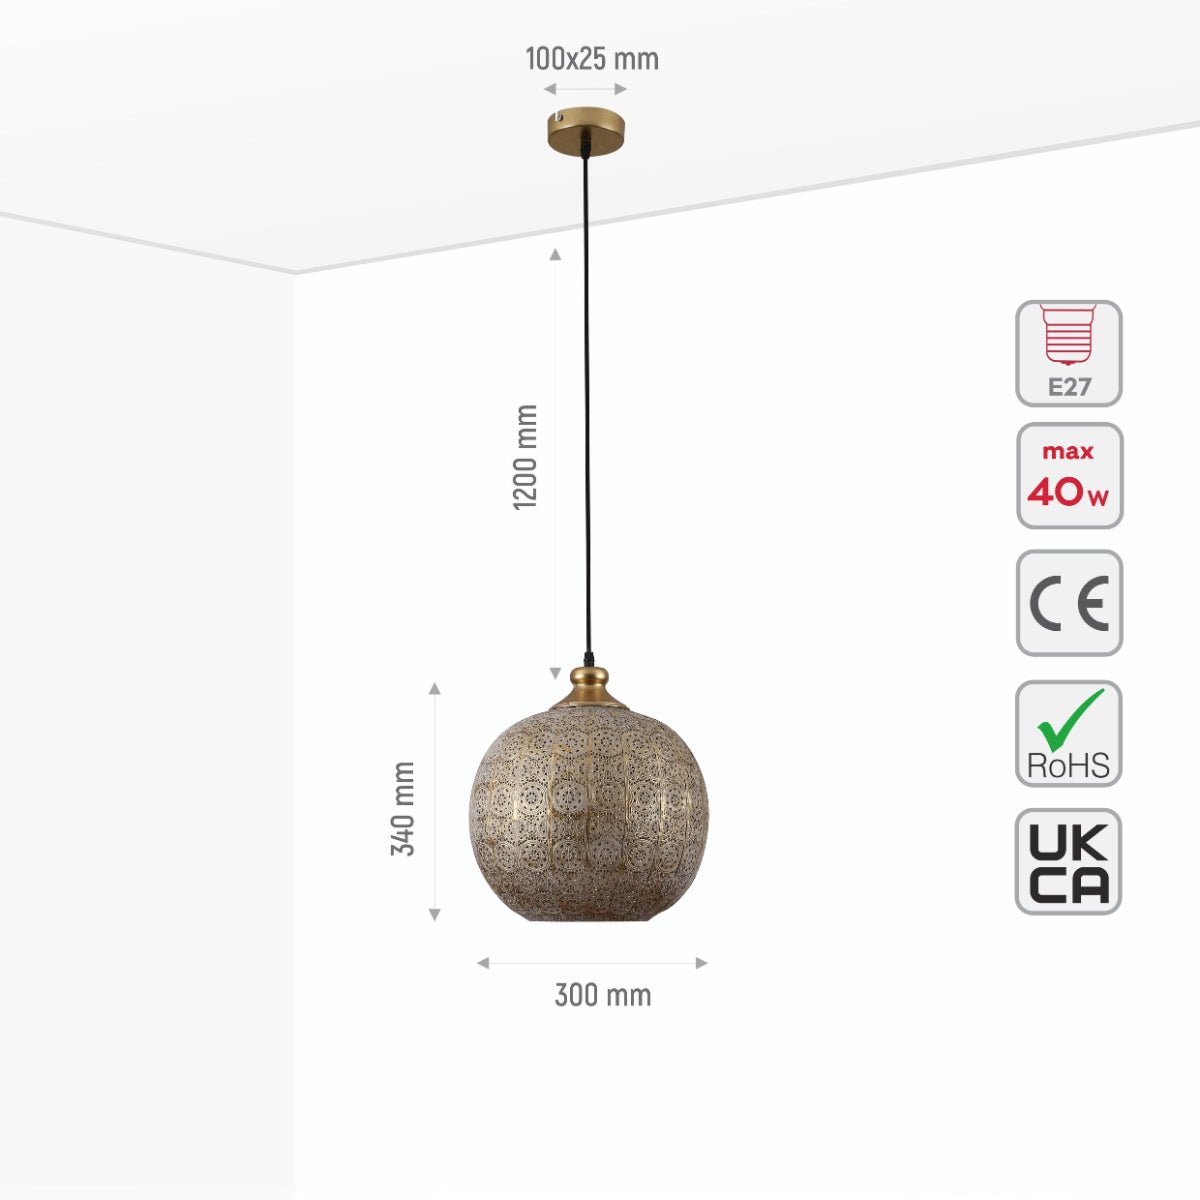 Size and specs of Antique Brass Metal Globe Pendant Ceiling Light with E27 | TEKLED 150-18054